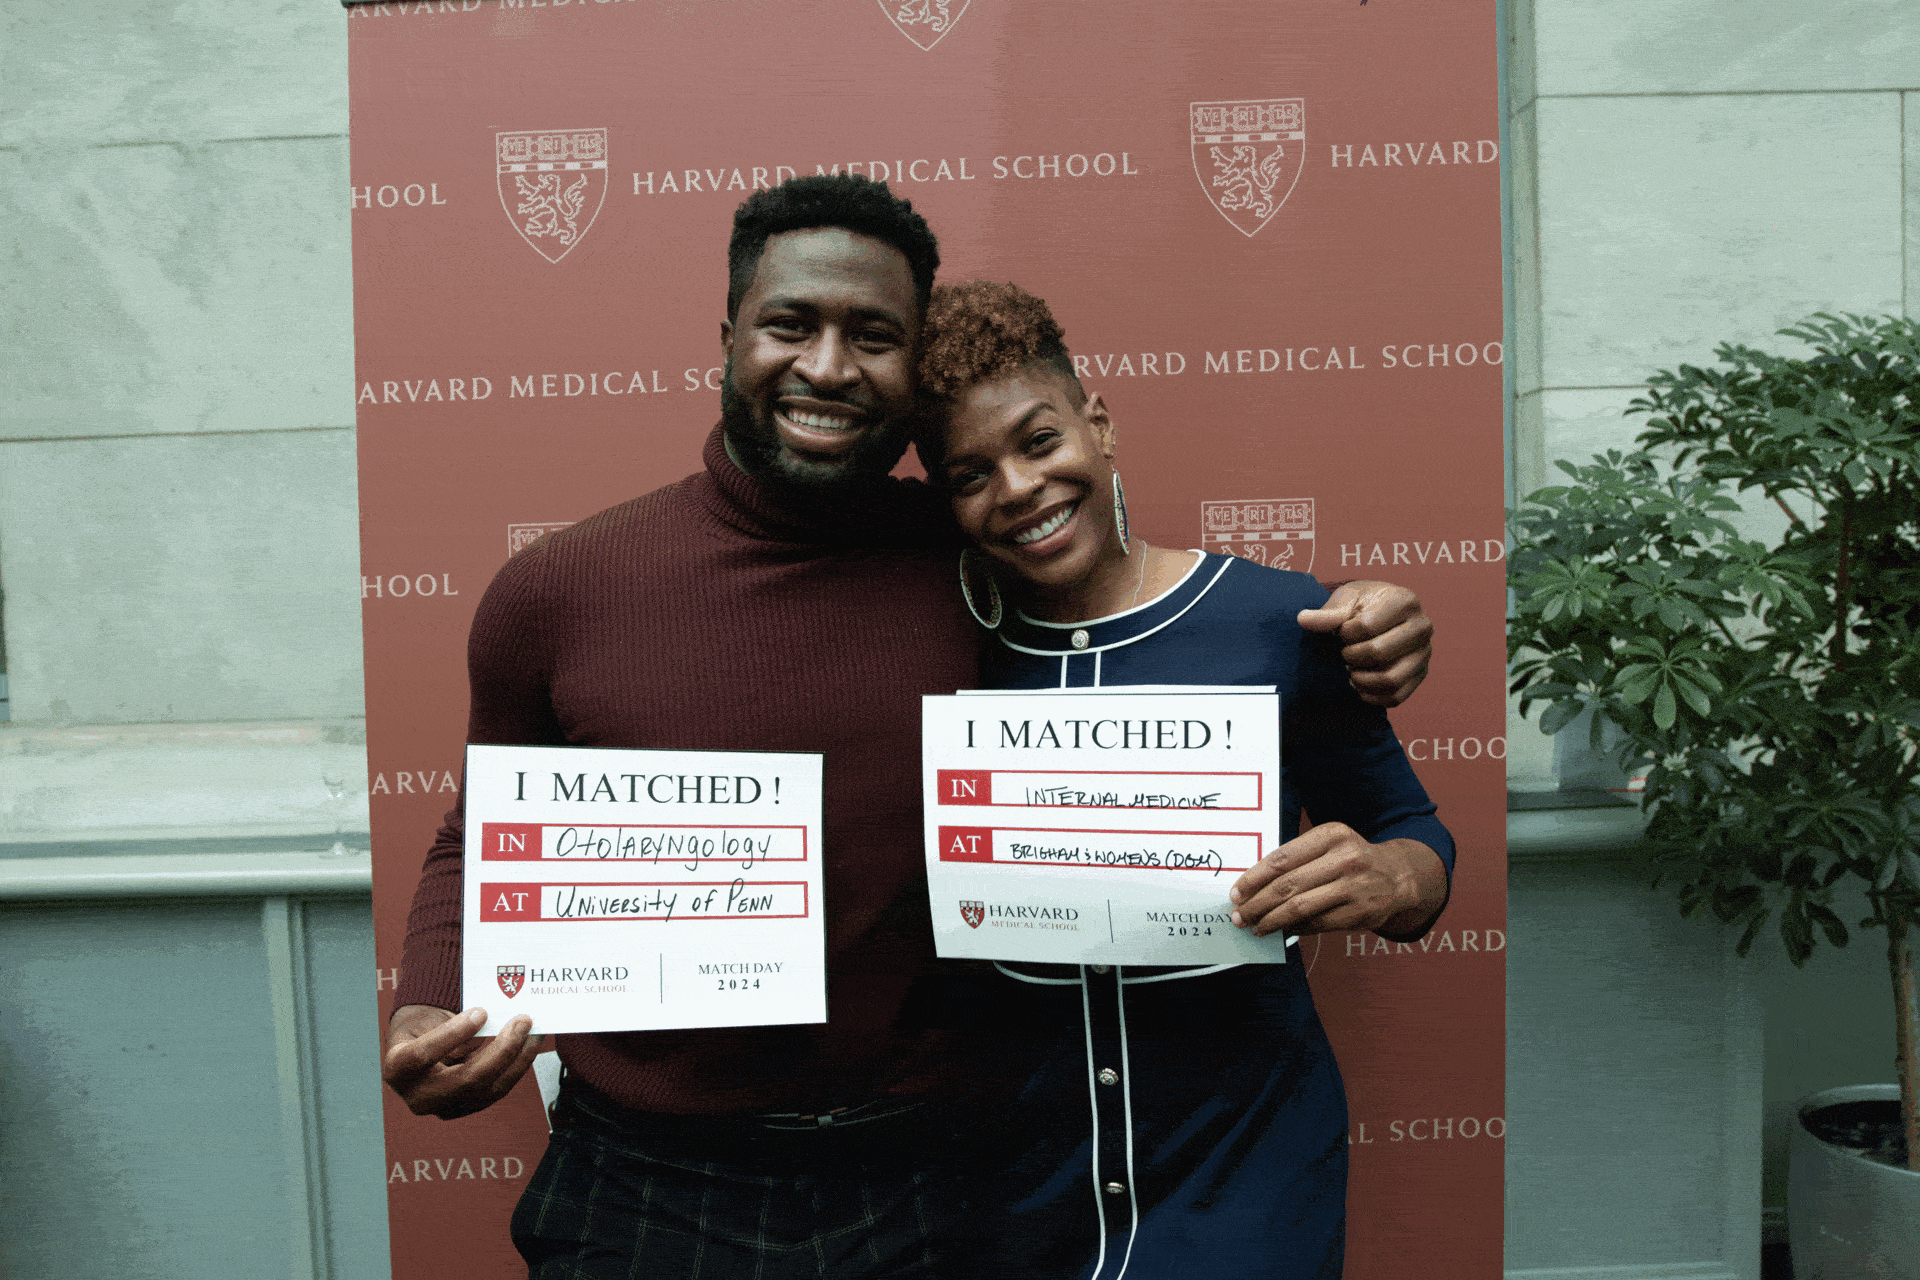 Rotating images of photos with 1-2 MD students holding I Matched! signs in front of a Harvard Medical School step-and-repeat backdrop